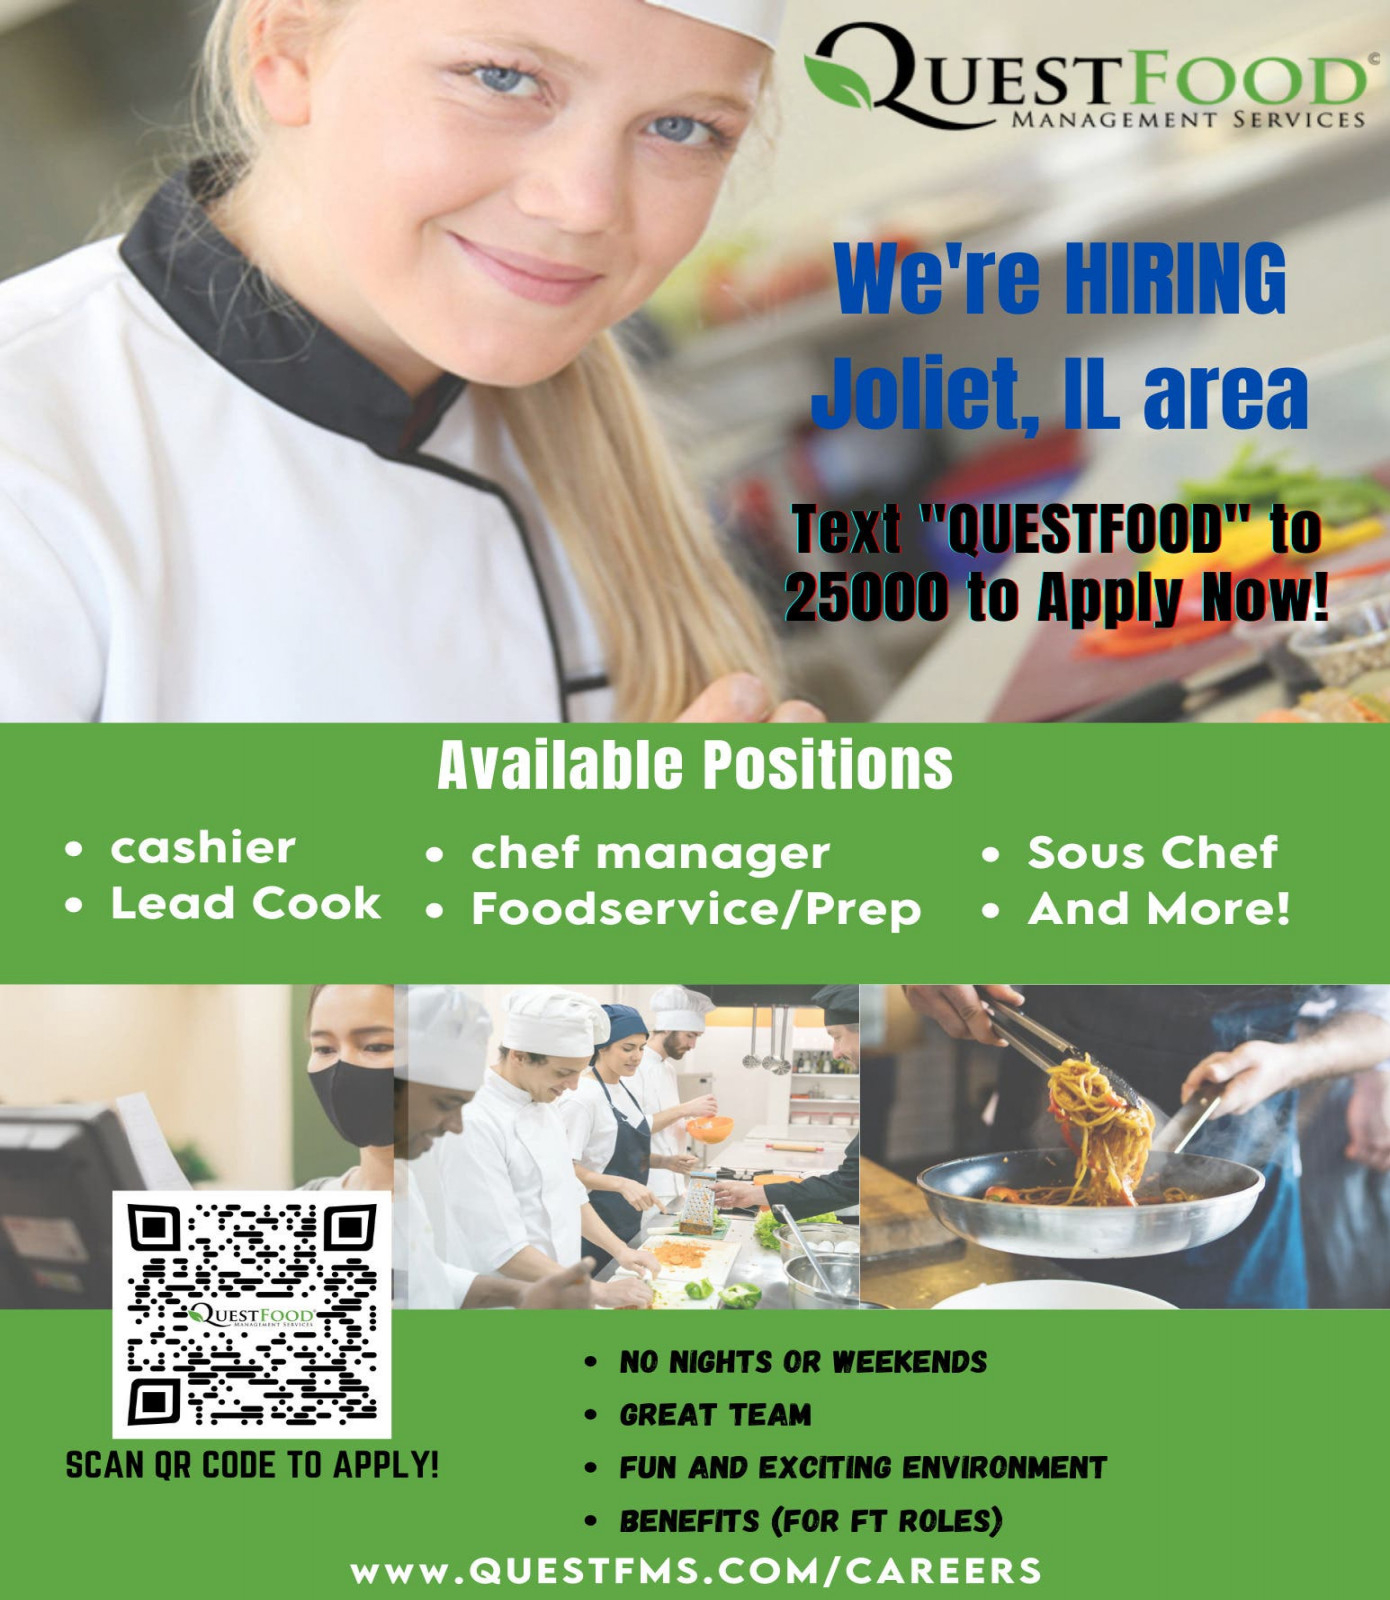 Quest Food Hiring in Joliet (Chef Manger, Sous Chef, Lead Cook